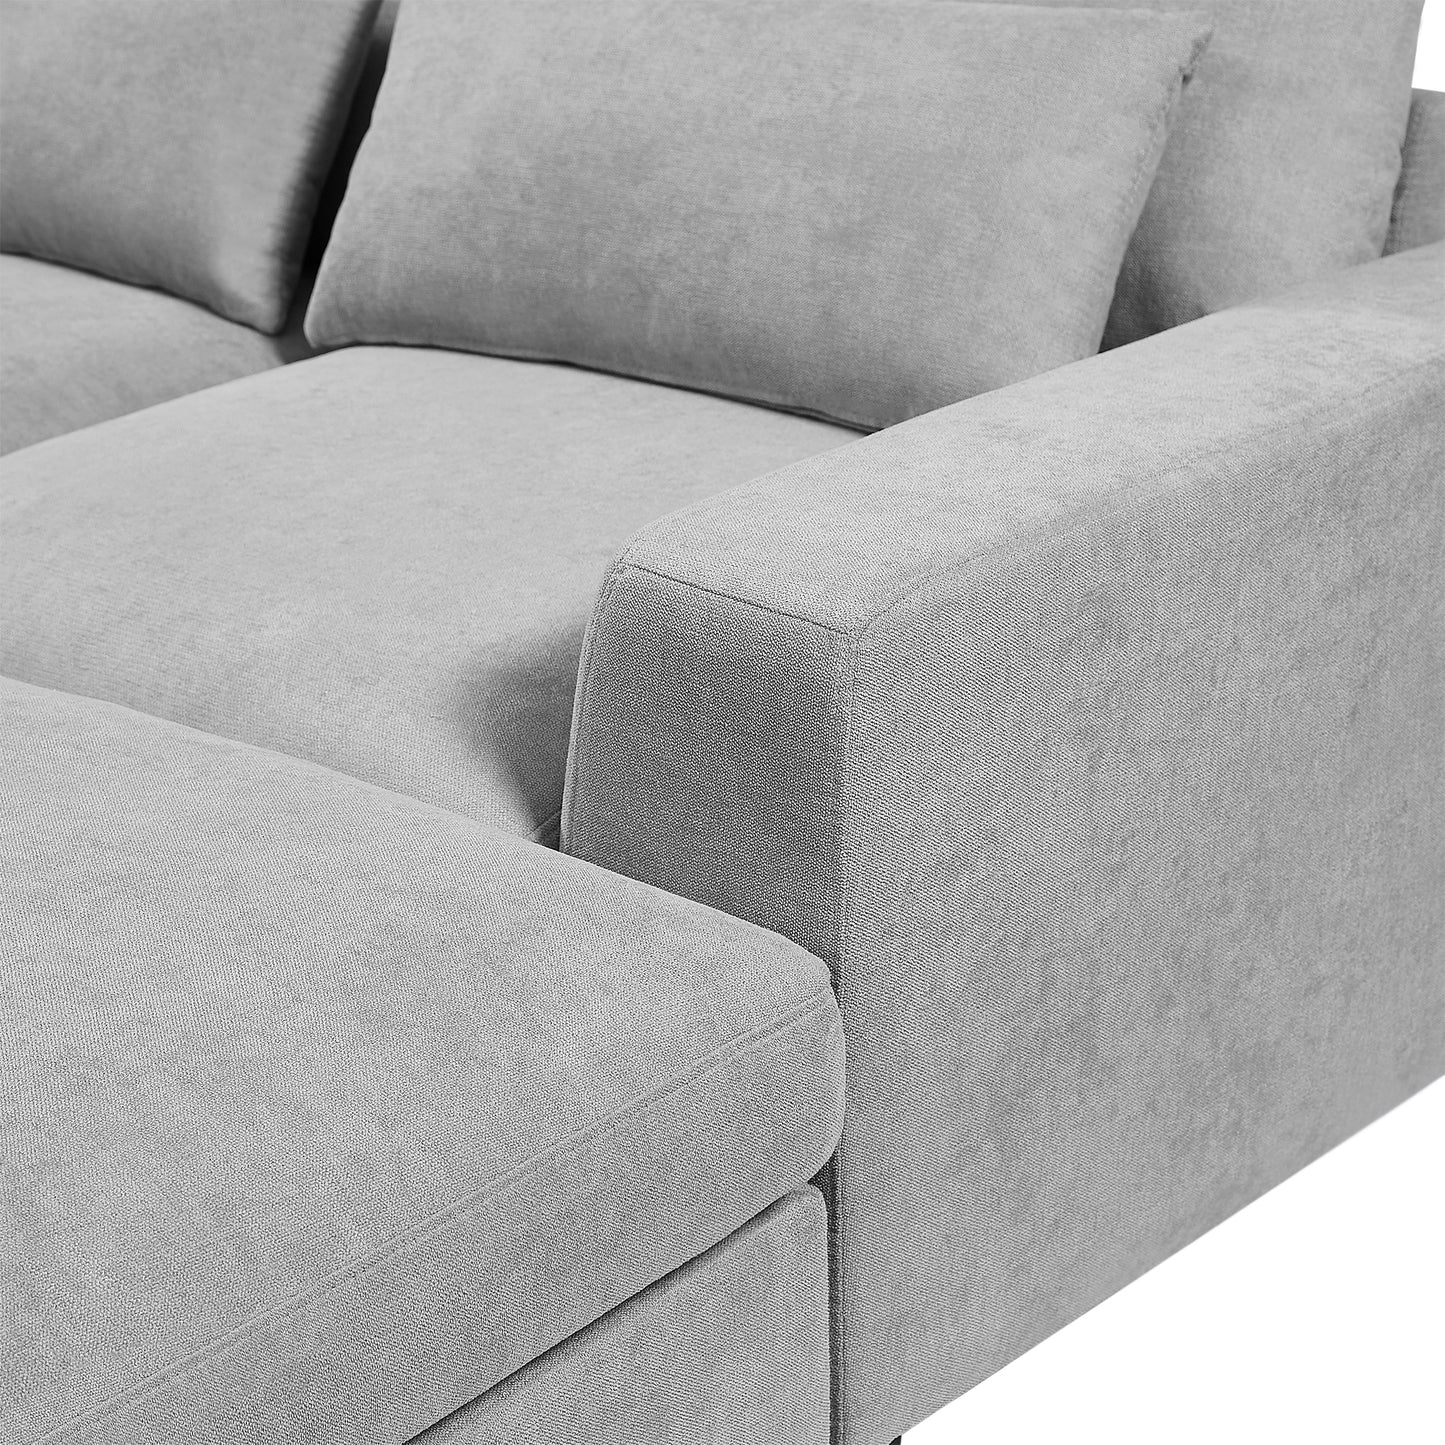 Light Grey Modern Large L-Shape Sectional Sofa,  Convertible Sofa Couch with Reversible Chaise for Living Room